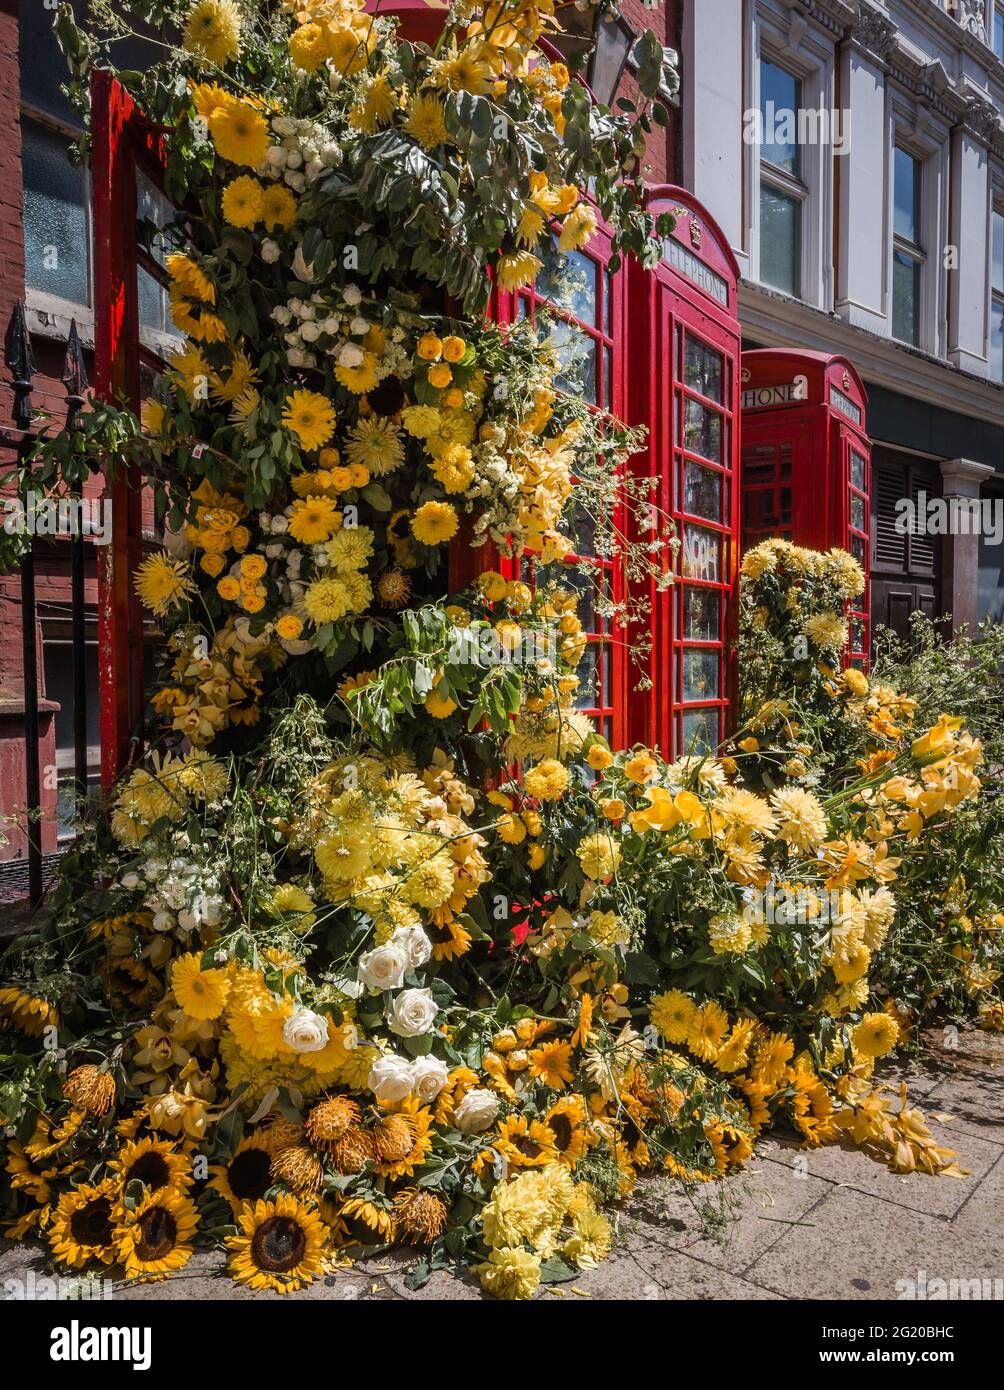 Foral guru, Lewis Miller, and royal florist Simon Lycett 'create a positive, emotional response through flowers' in London. Stock Photo